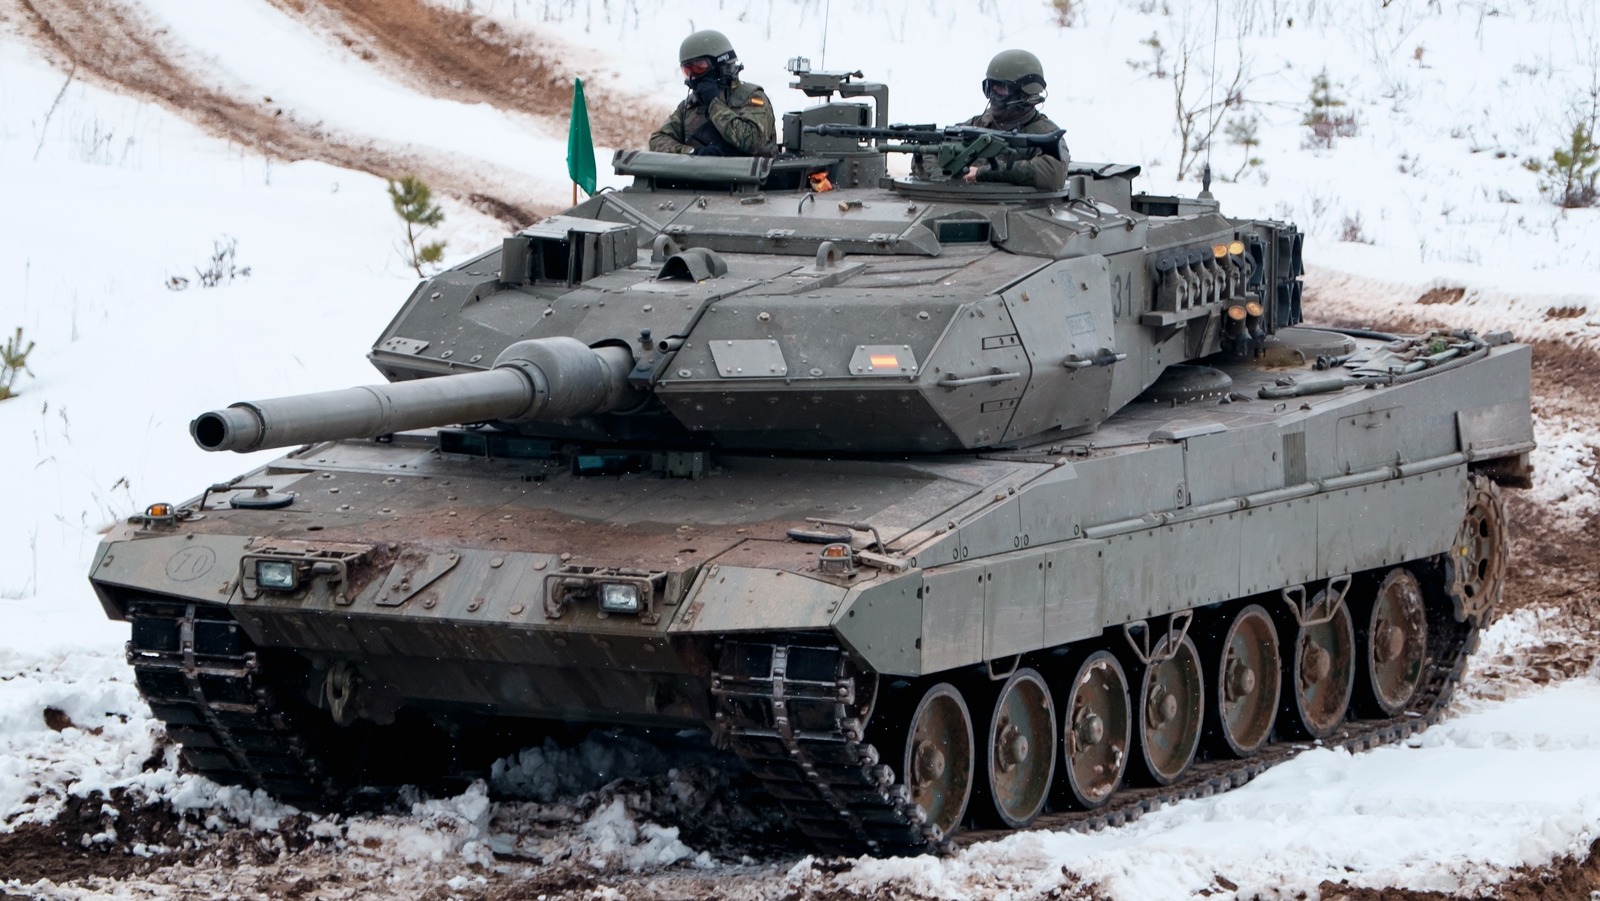 Tanks are here to stay: What the Army's future armored fleet will look like